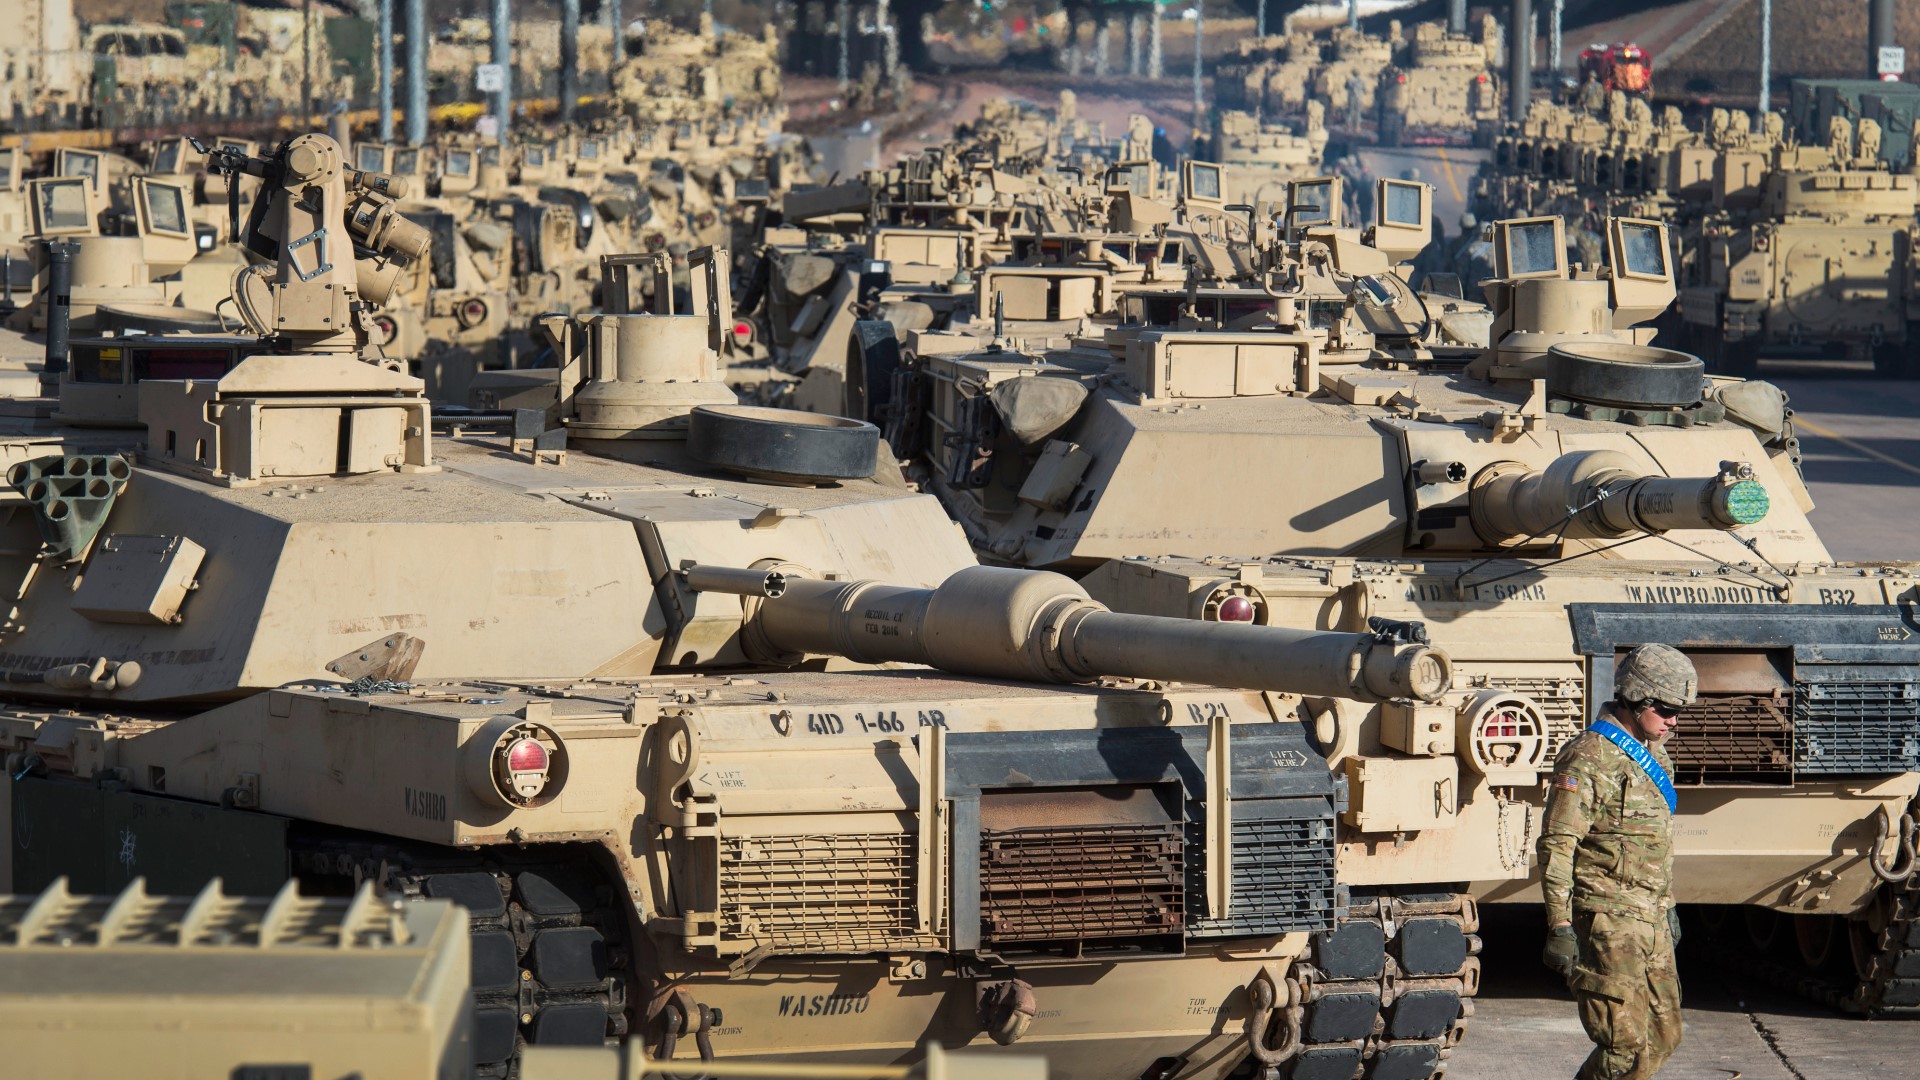 The U.S. decision came on the heels of Germany agreeing to send 14 Leopard 2 A6 tanks from its own stocks.